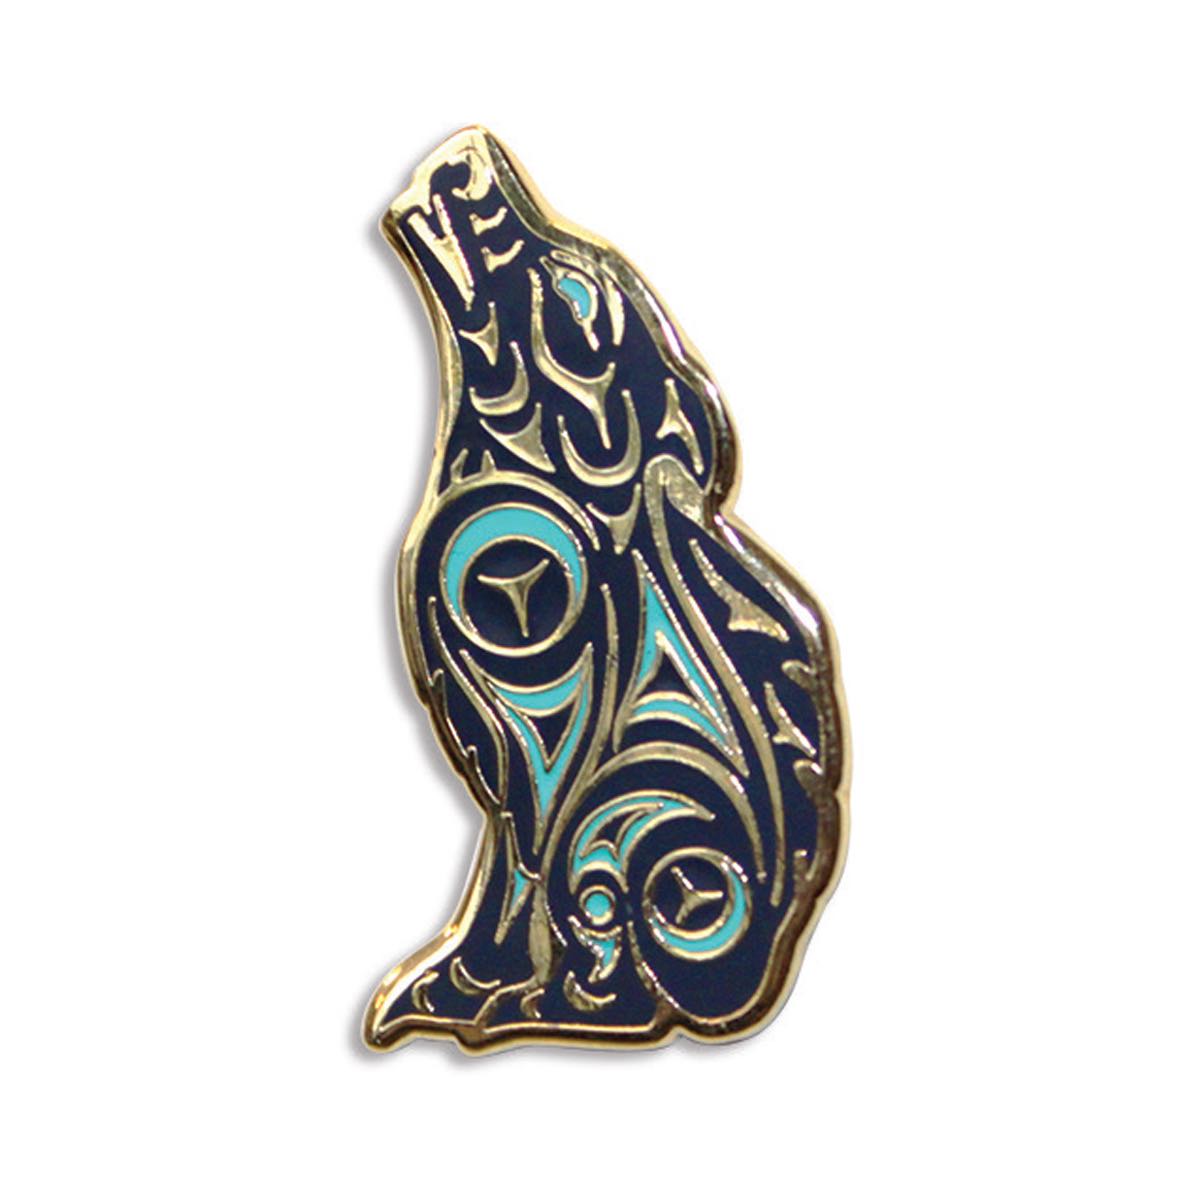 Enamel Pin Darell Thorne Wolf - EP17 - EP17 - House of Himwitsa Native Art Gallery and Gifts